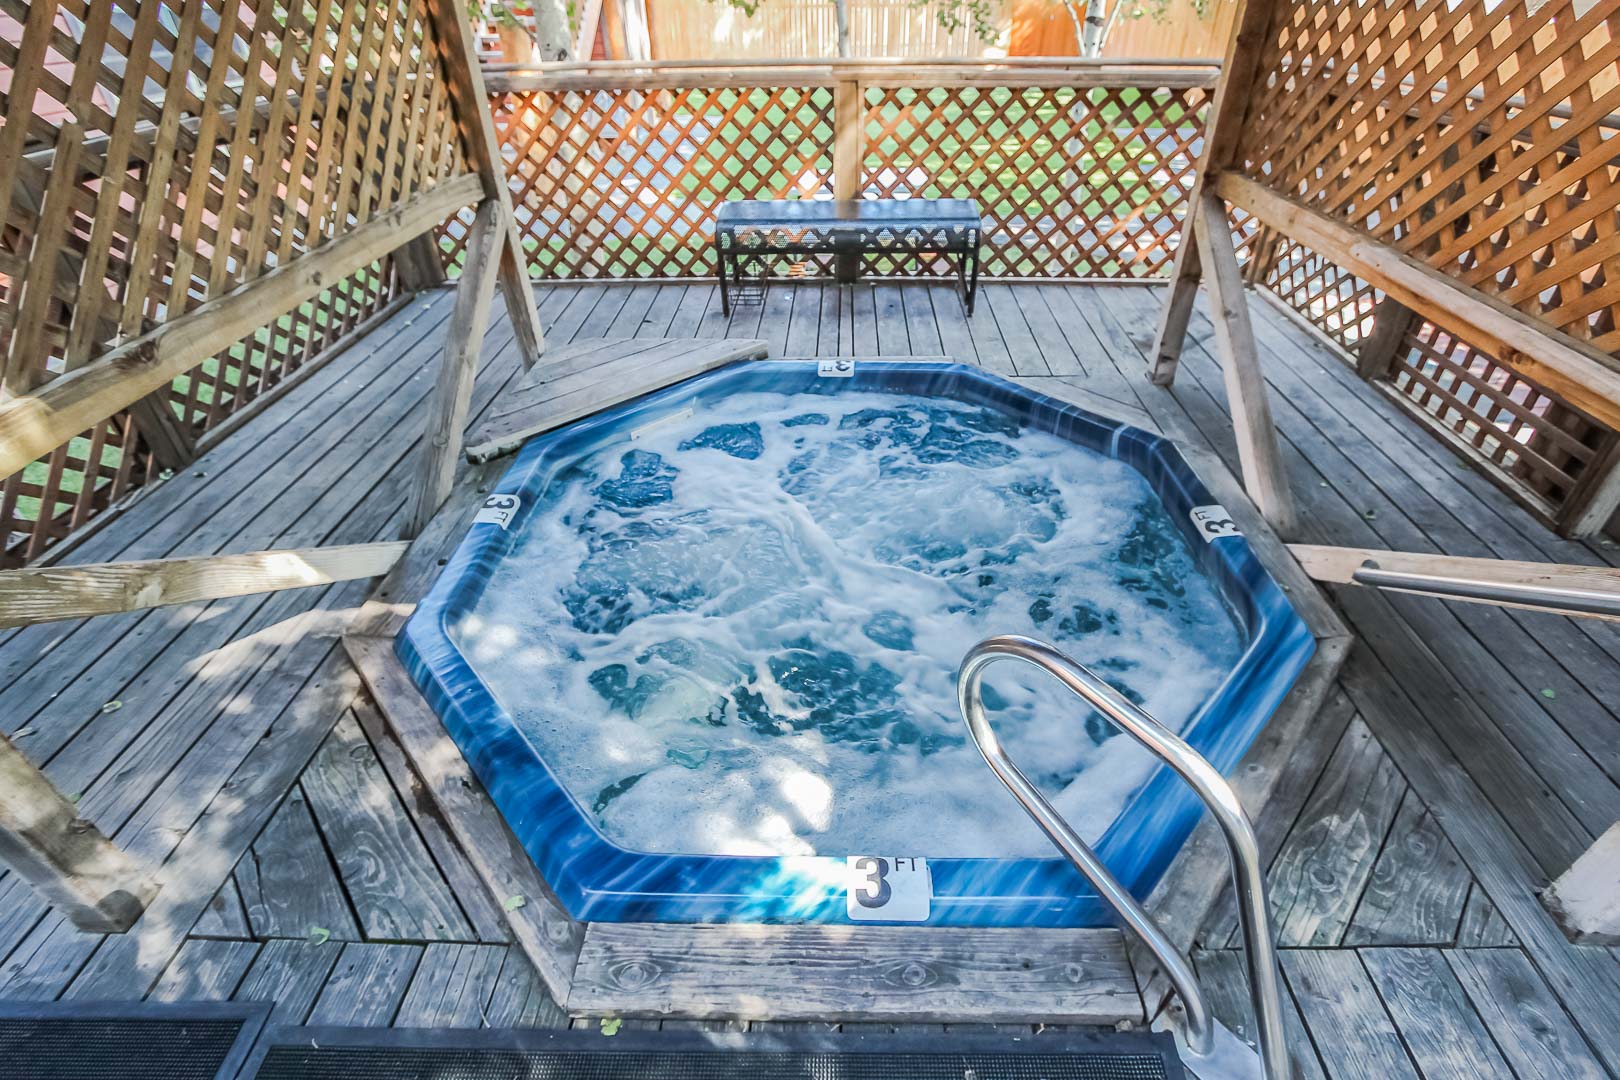 A relaxing outdoor Jacuzzi tub at VRI's Jackson Pines in Wyoming.